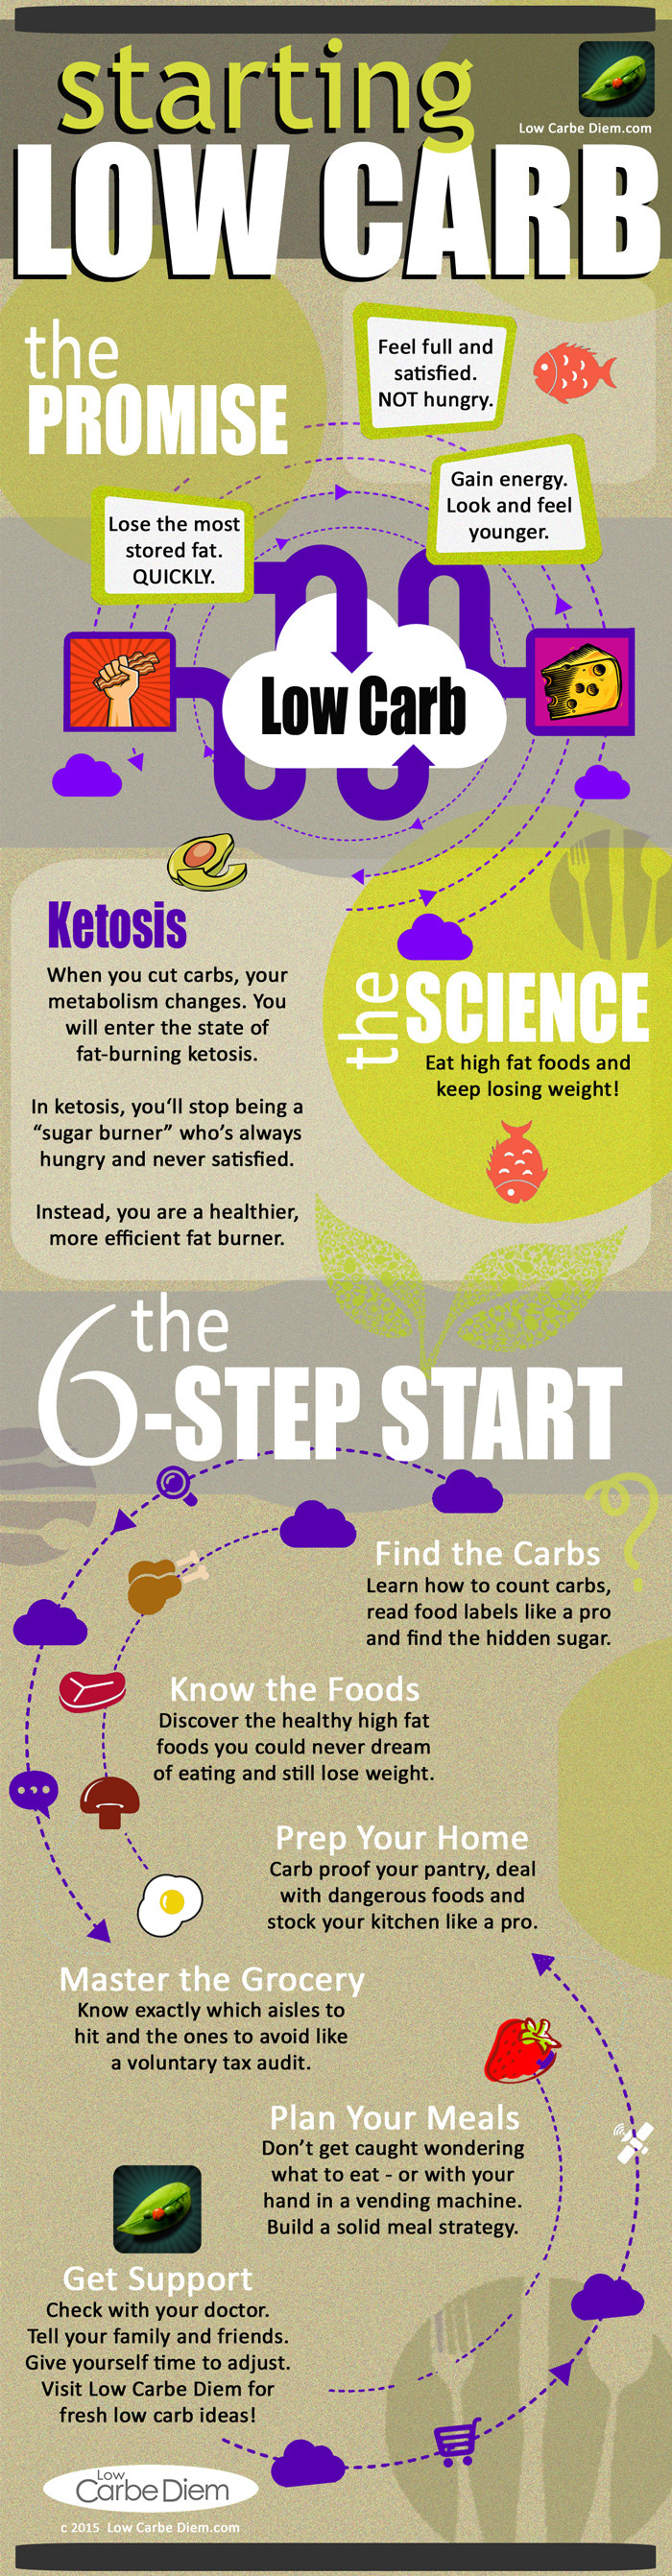 Starting Keto Diet
 Low Carb Infographic 6 Step Start Low Carb